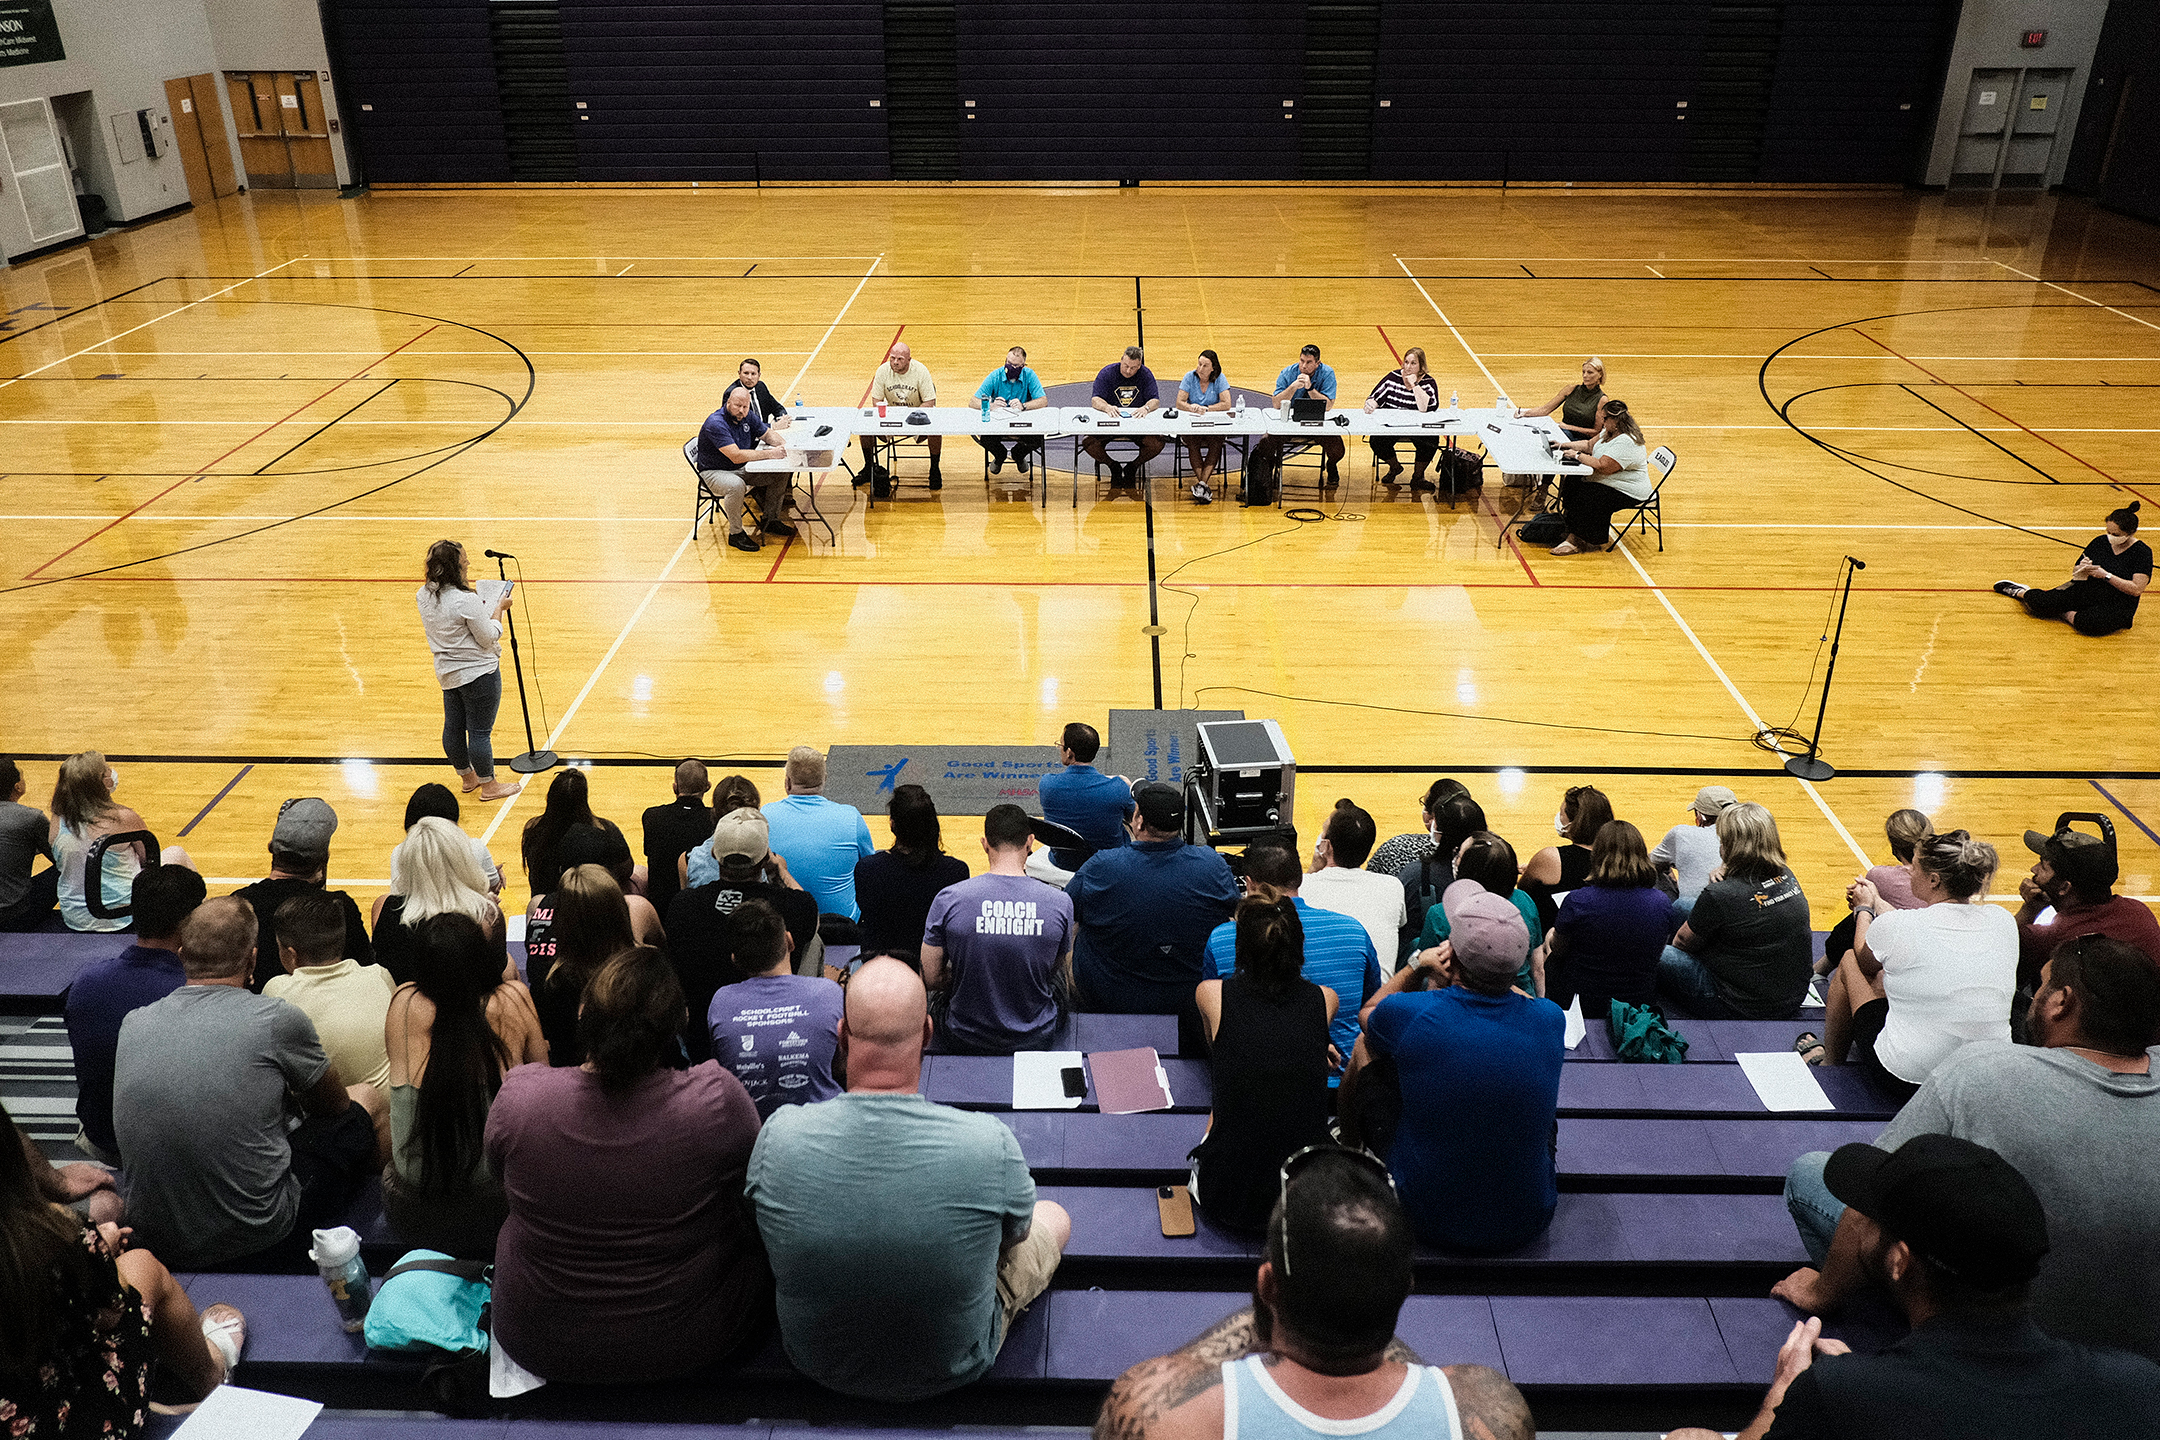 Photo from above of a row of people sit at tables in a gymnasium, in the back, a woman speaking at a microphone in the middle, and bleachers full of people listening in the front